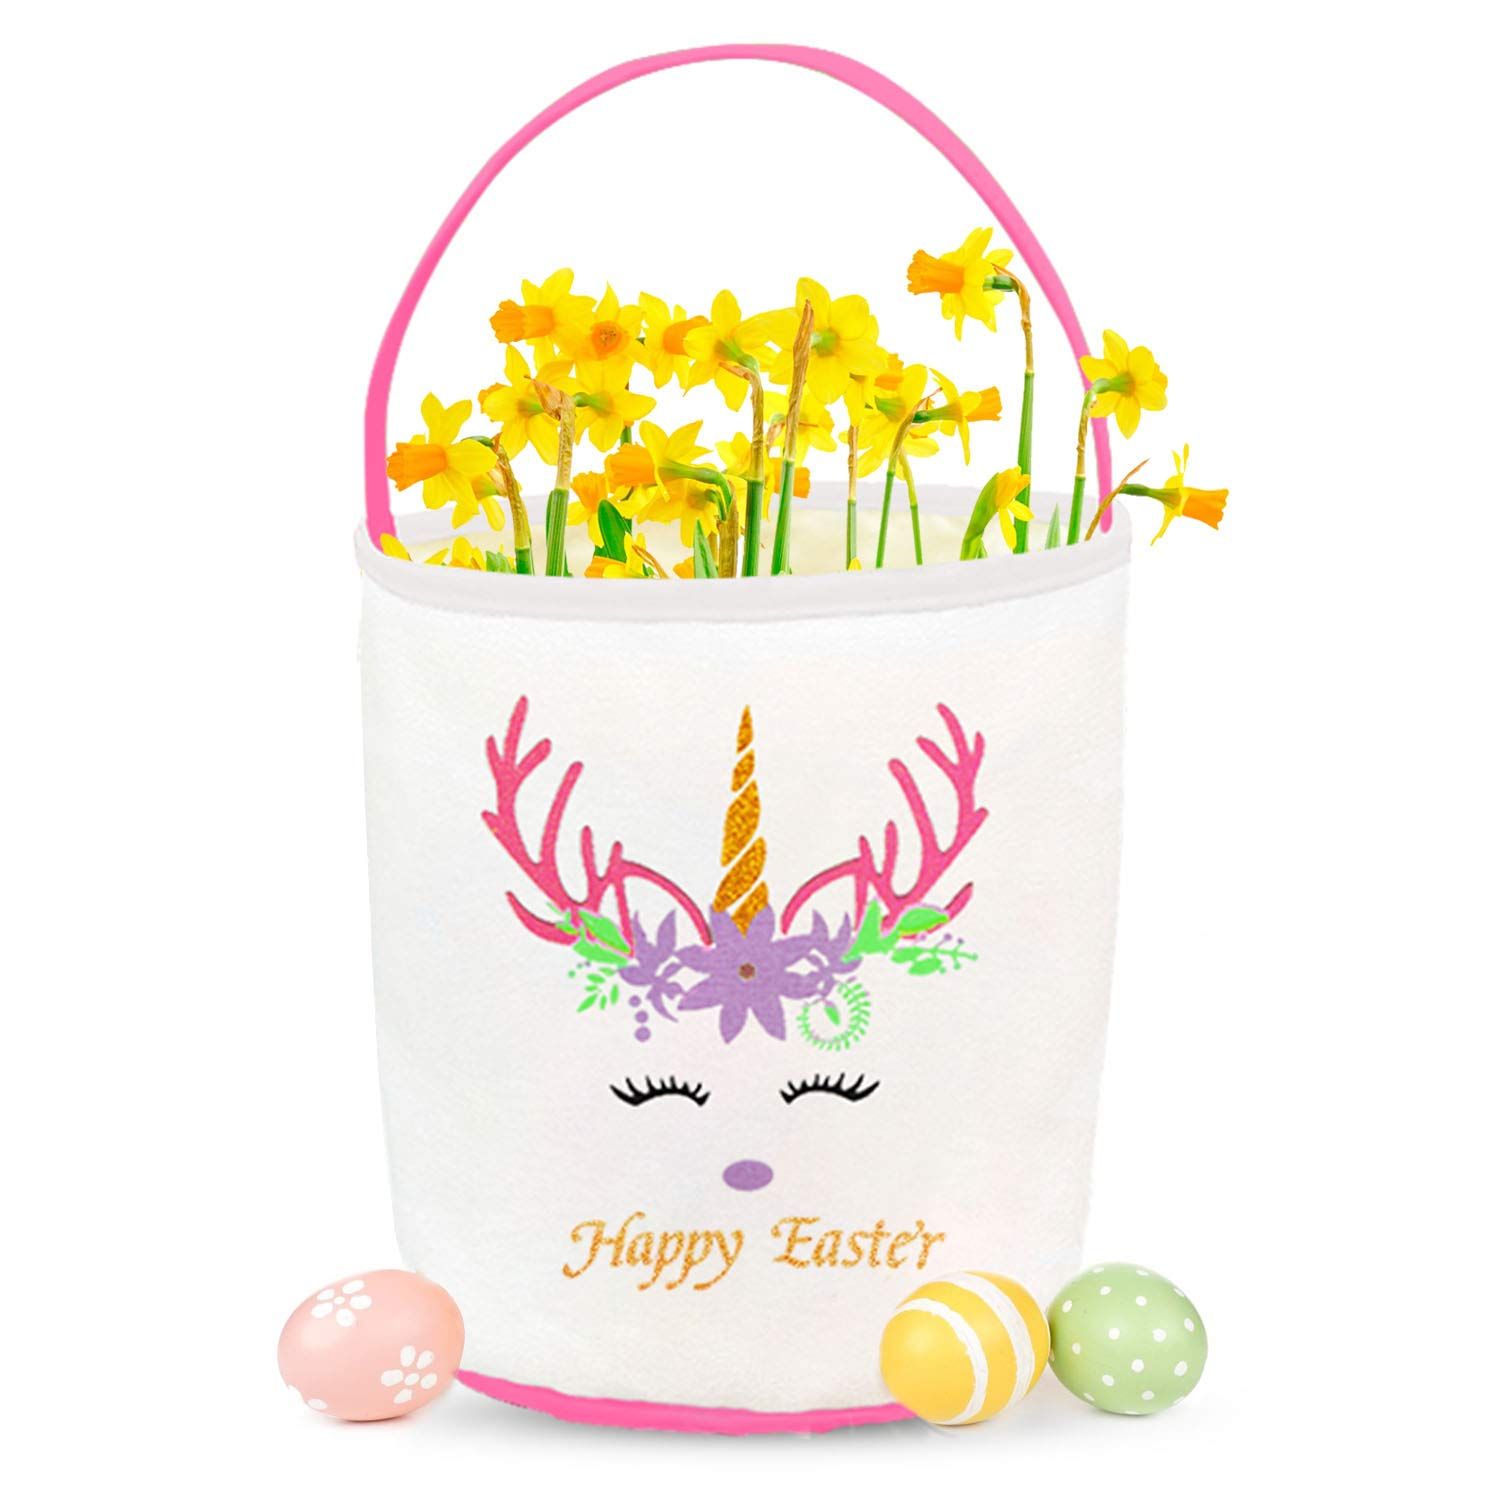 TOPULORS Easter Gift Bag Easter Presents for Kids from Easter Bunny Basket Personalized Easter Eggs Baskets&Bags for Kids for Daily Use with Easter Design Mady by Environmental Canvas-Cylinder Green